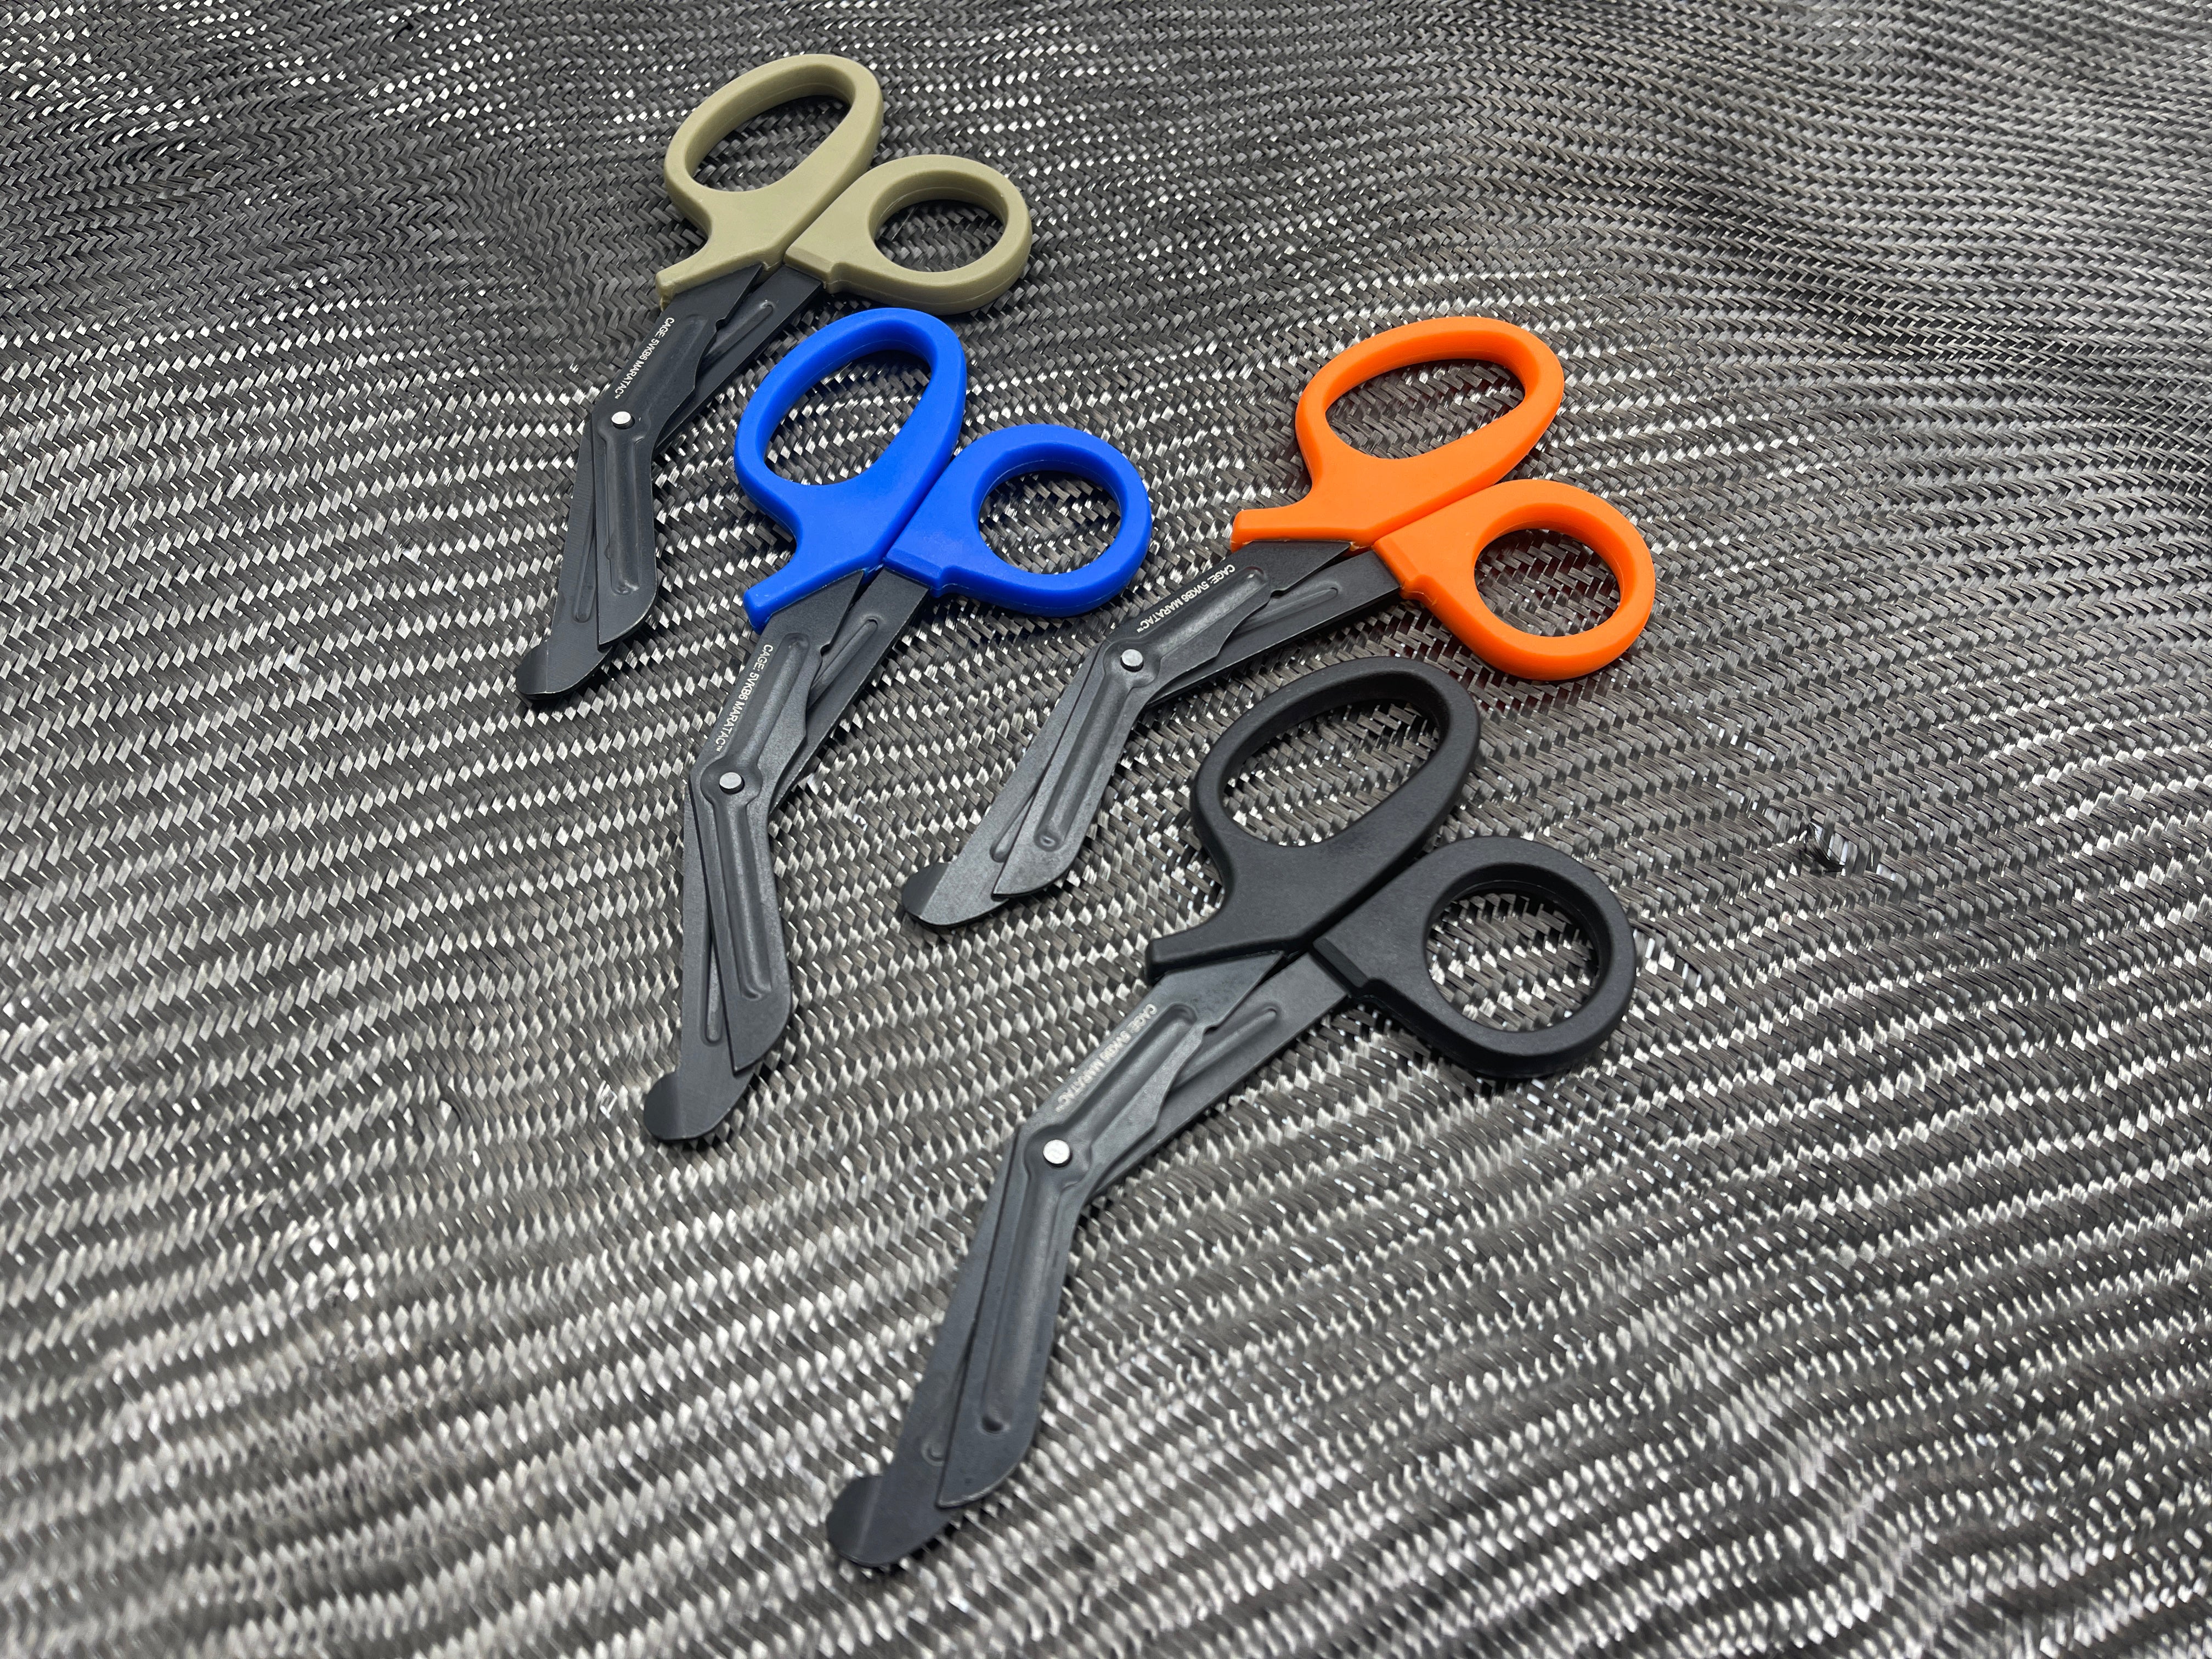 Chase Tactical Medical Trauma Shears - HCC Tactical